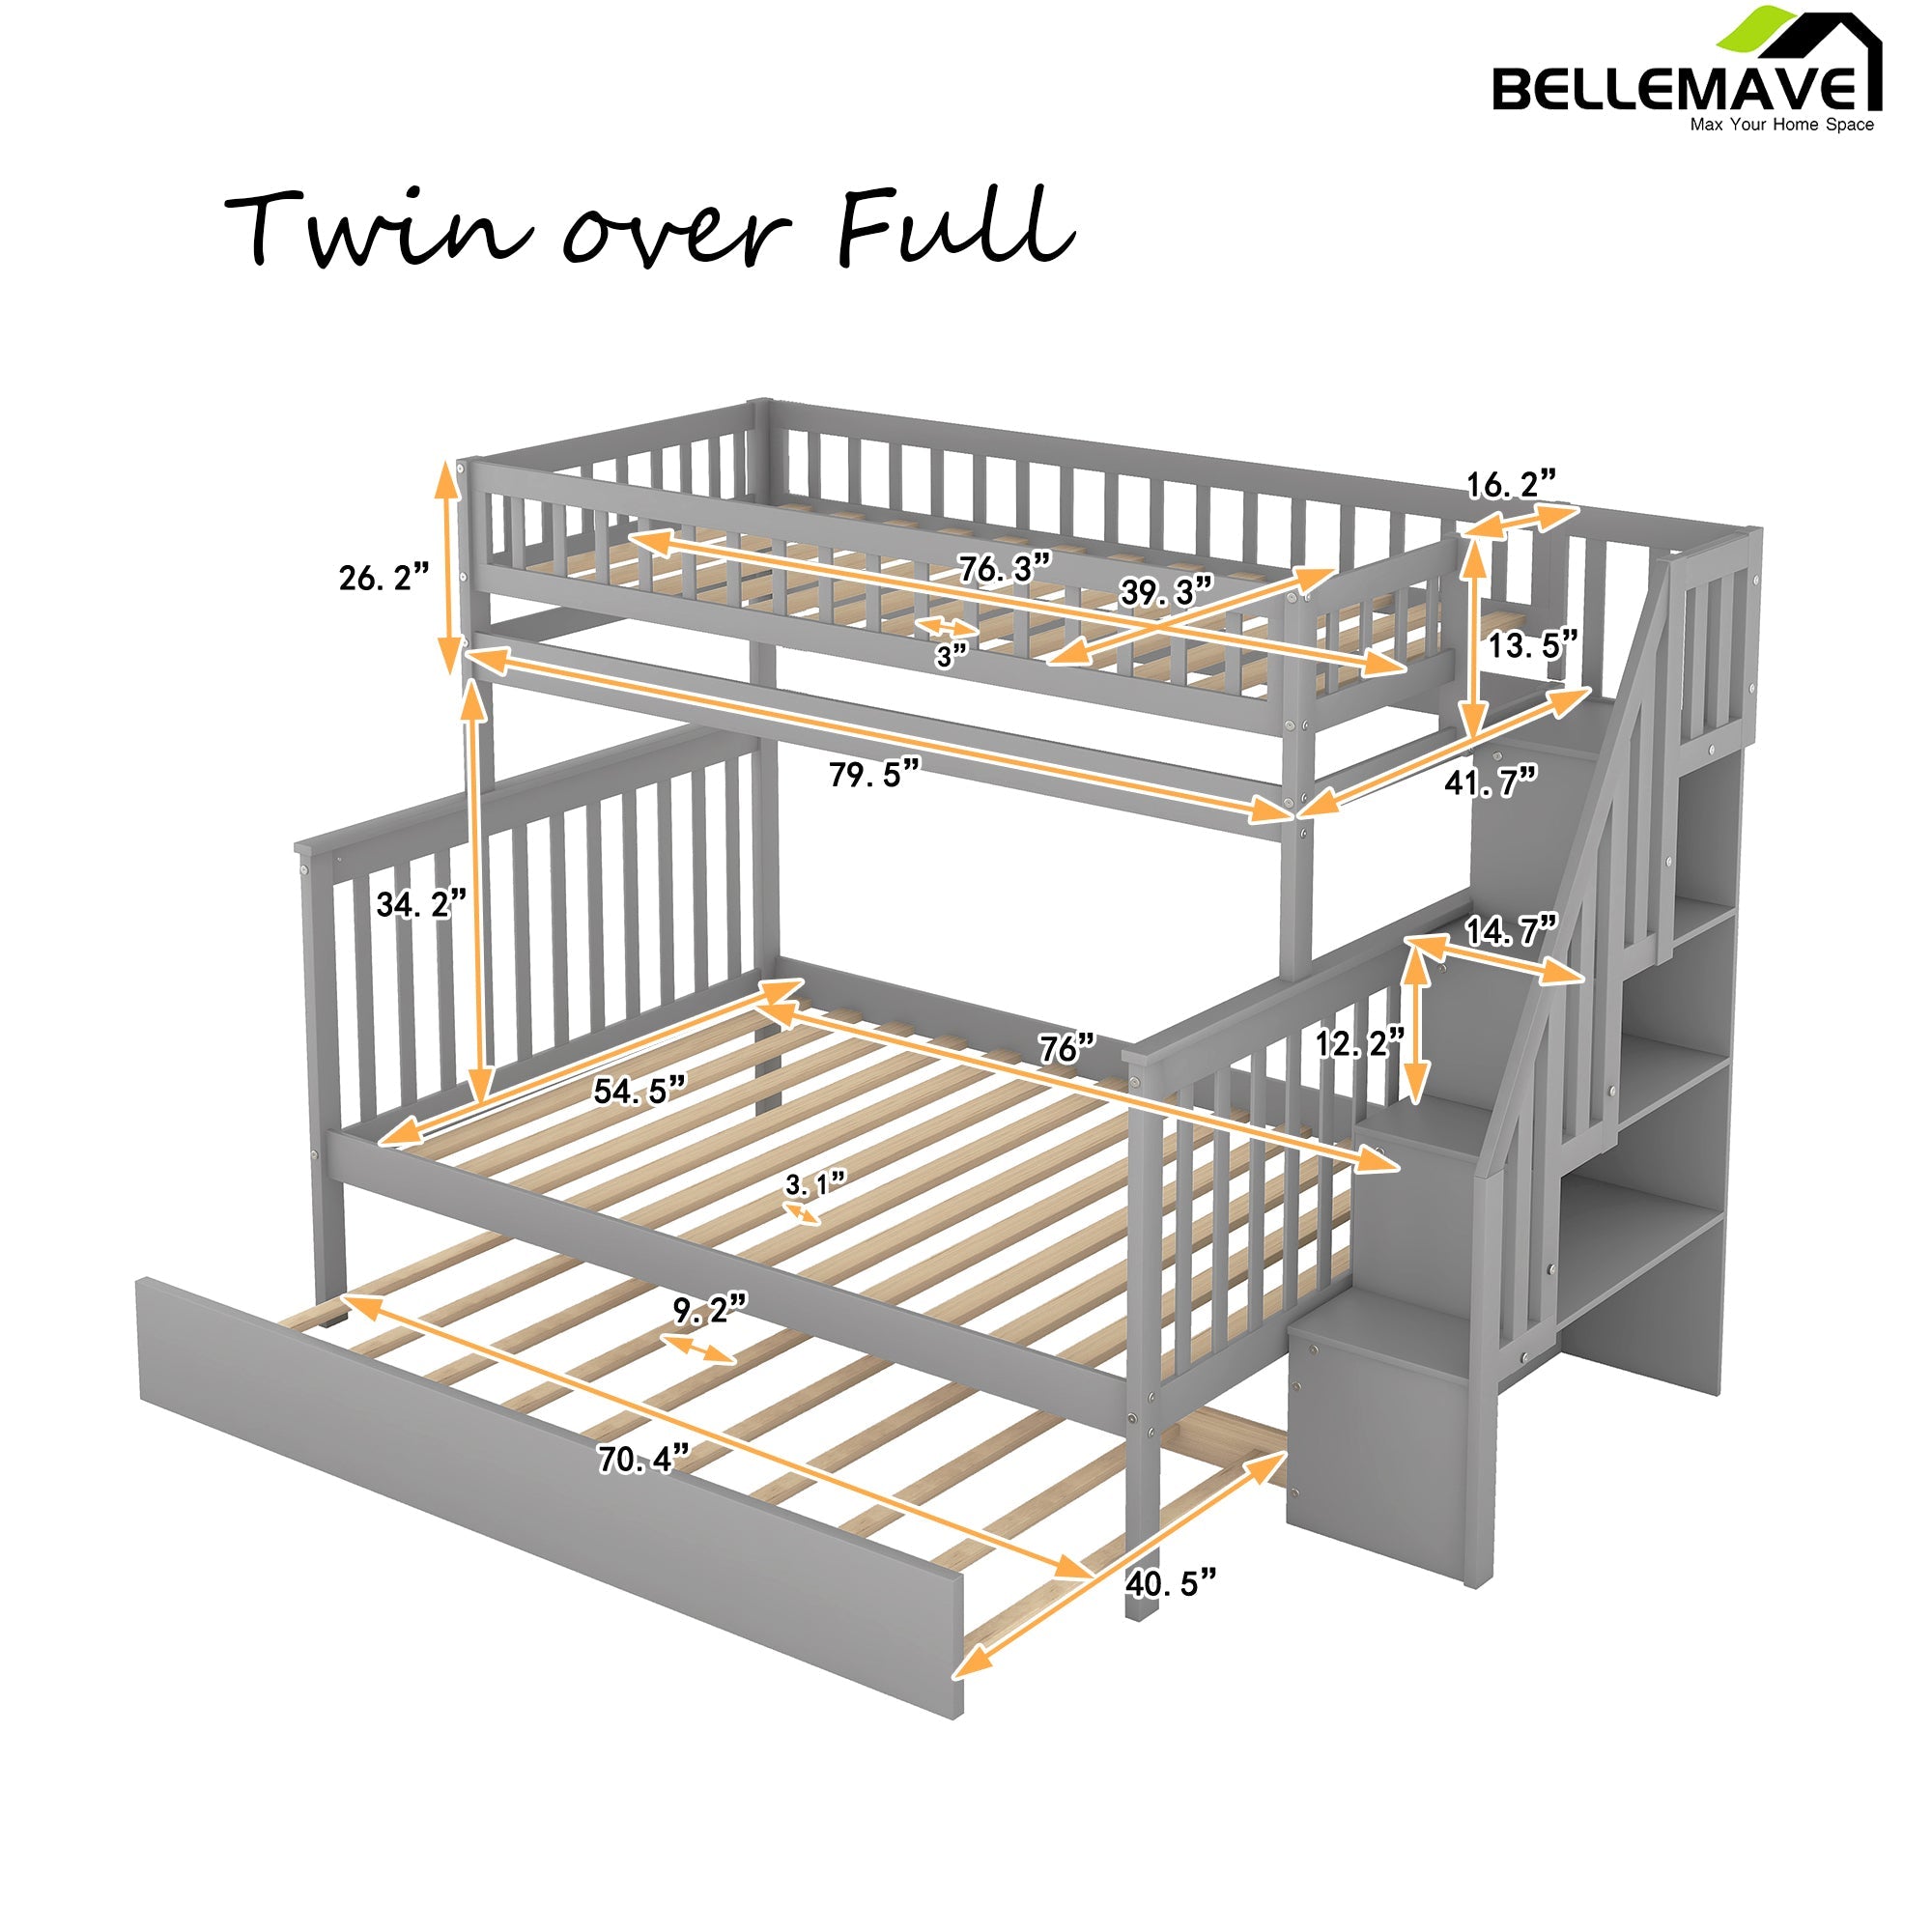 Bellemave Twin over Full Bunk Bed with Trundle and Staircase - Bellemave